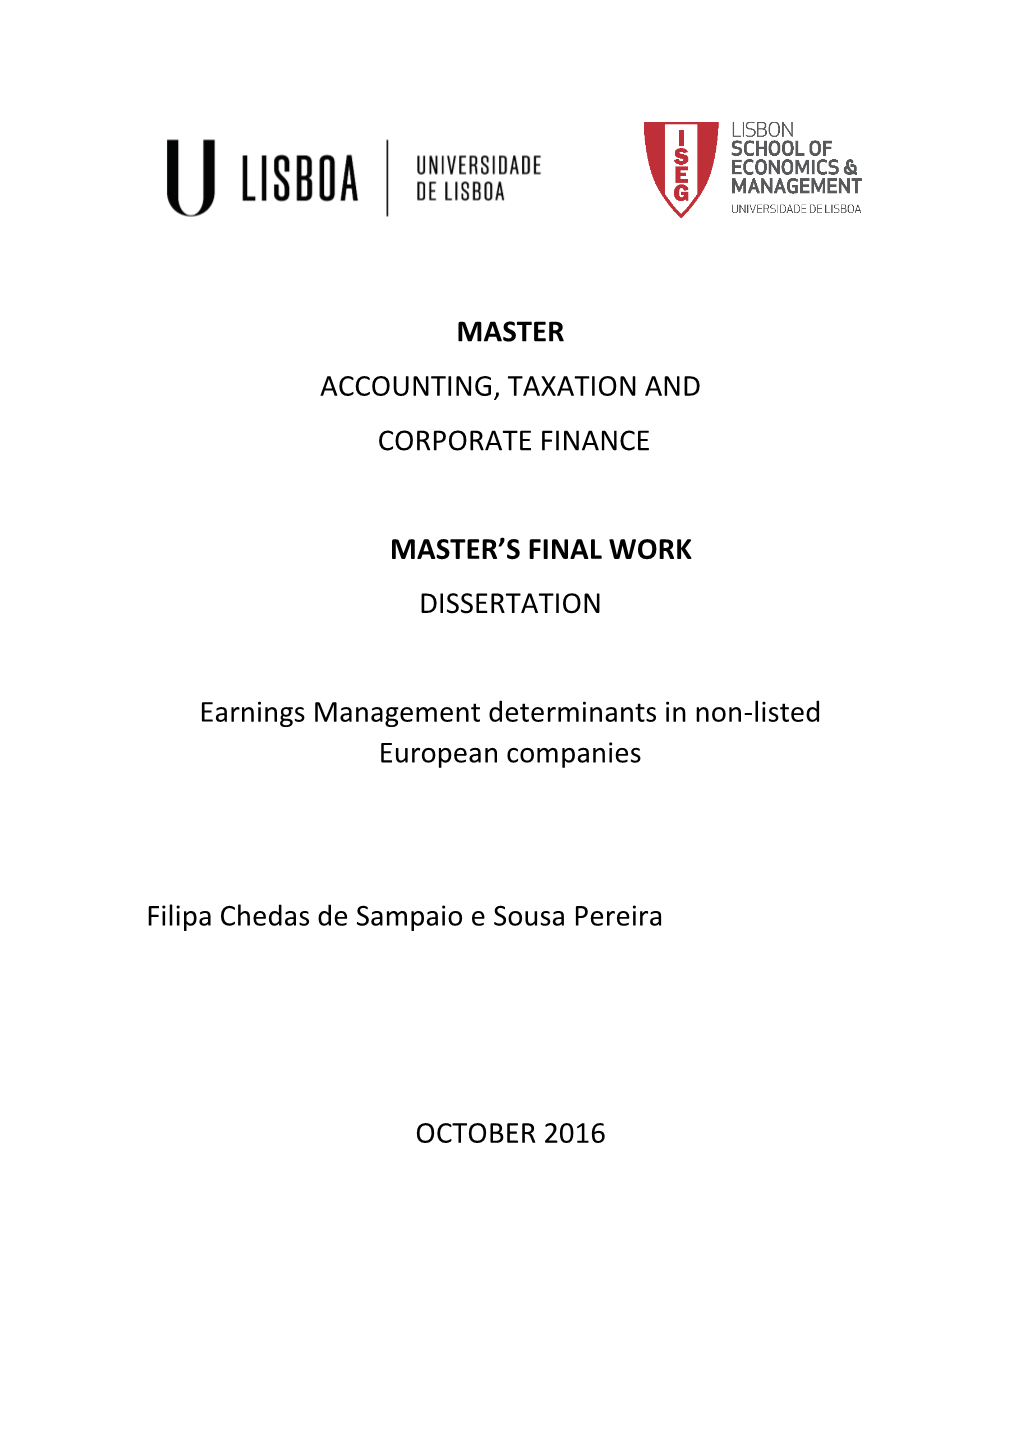 MASTER ACCOUNTING, TAXATION and CORPORATE FINANCE MASTER's FINAL WORK DISSERTATION Earnings Management Determinants in Non-Lis